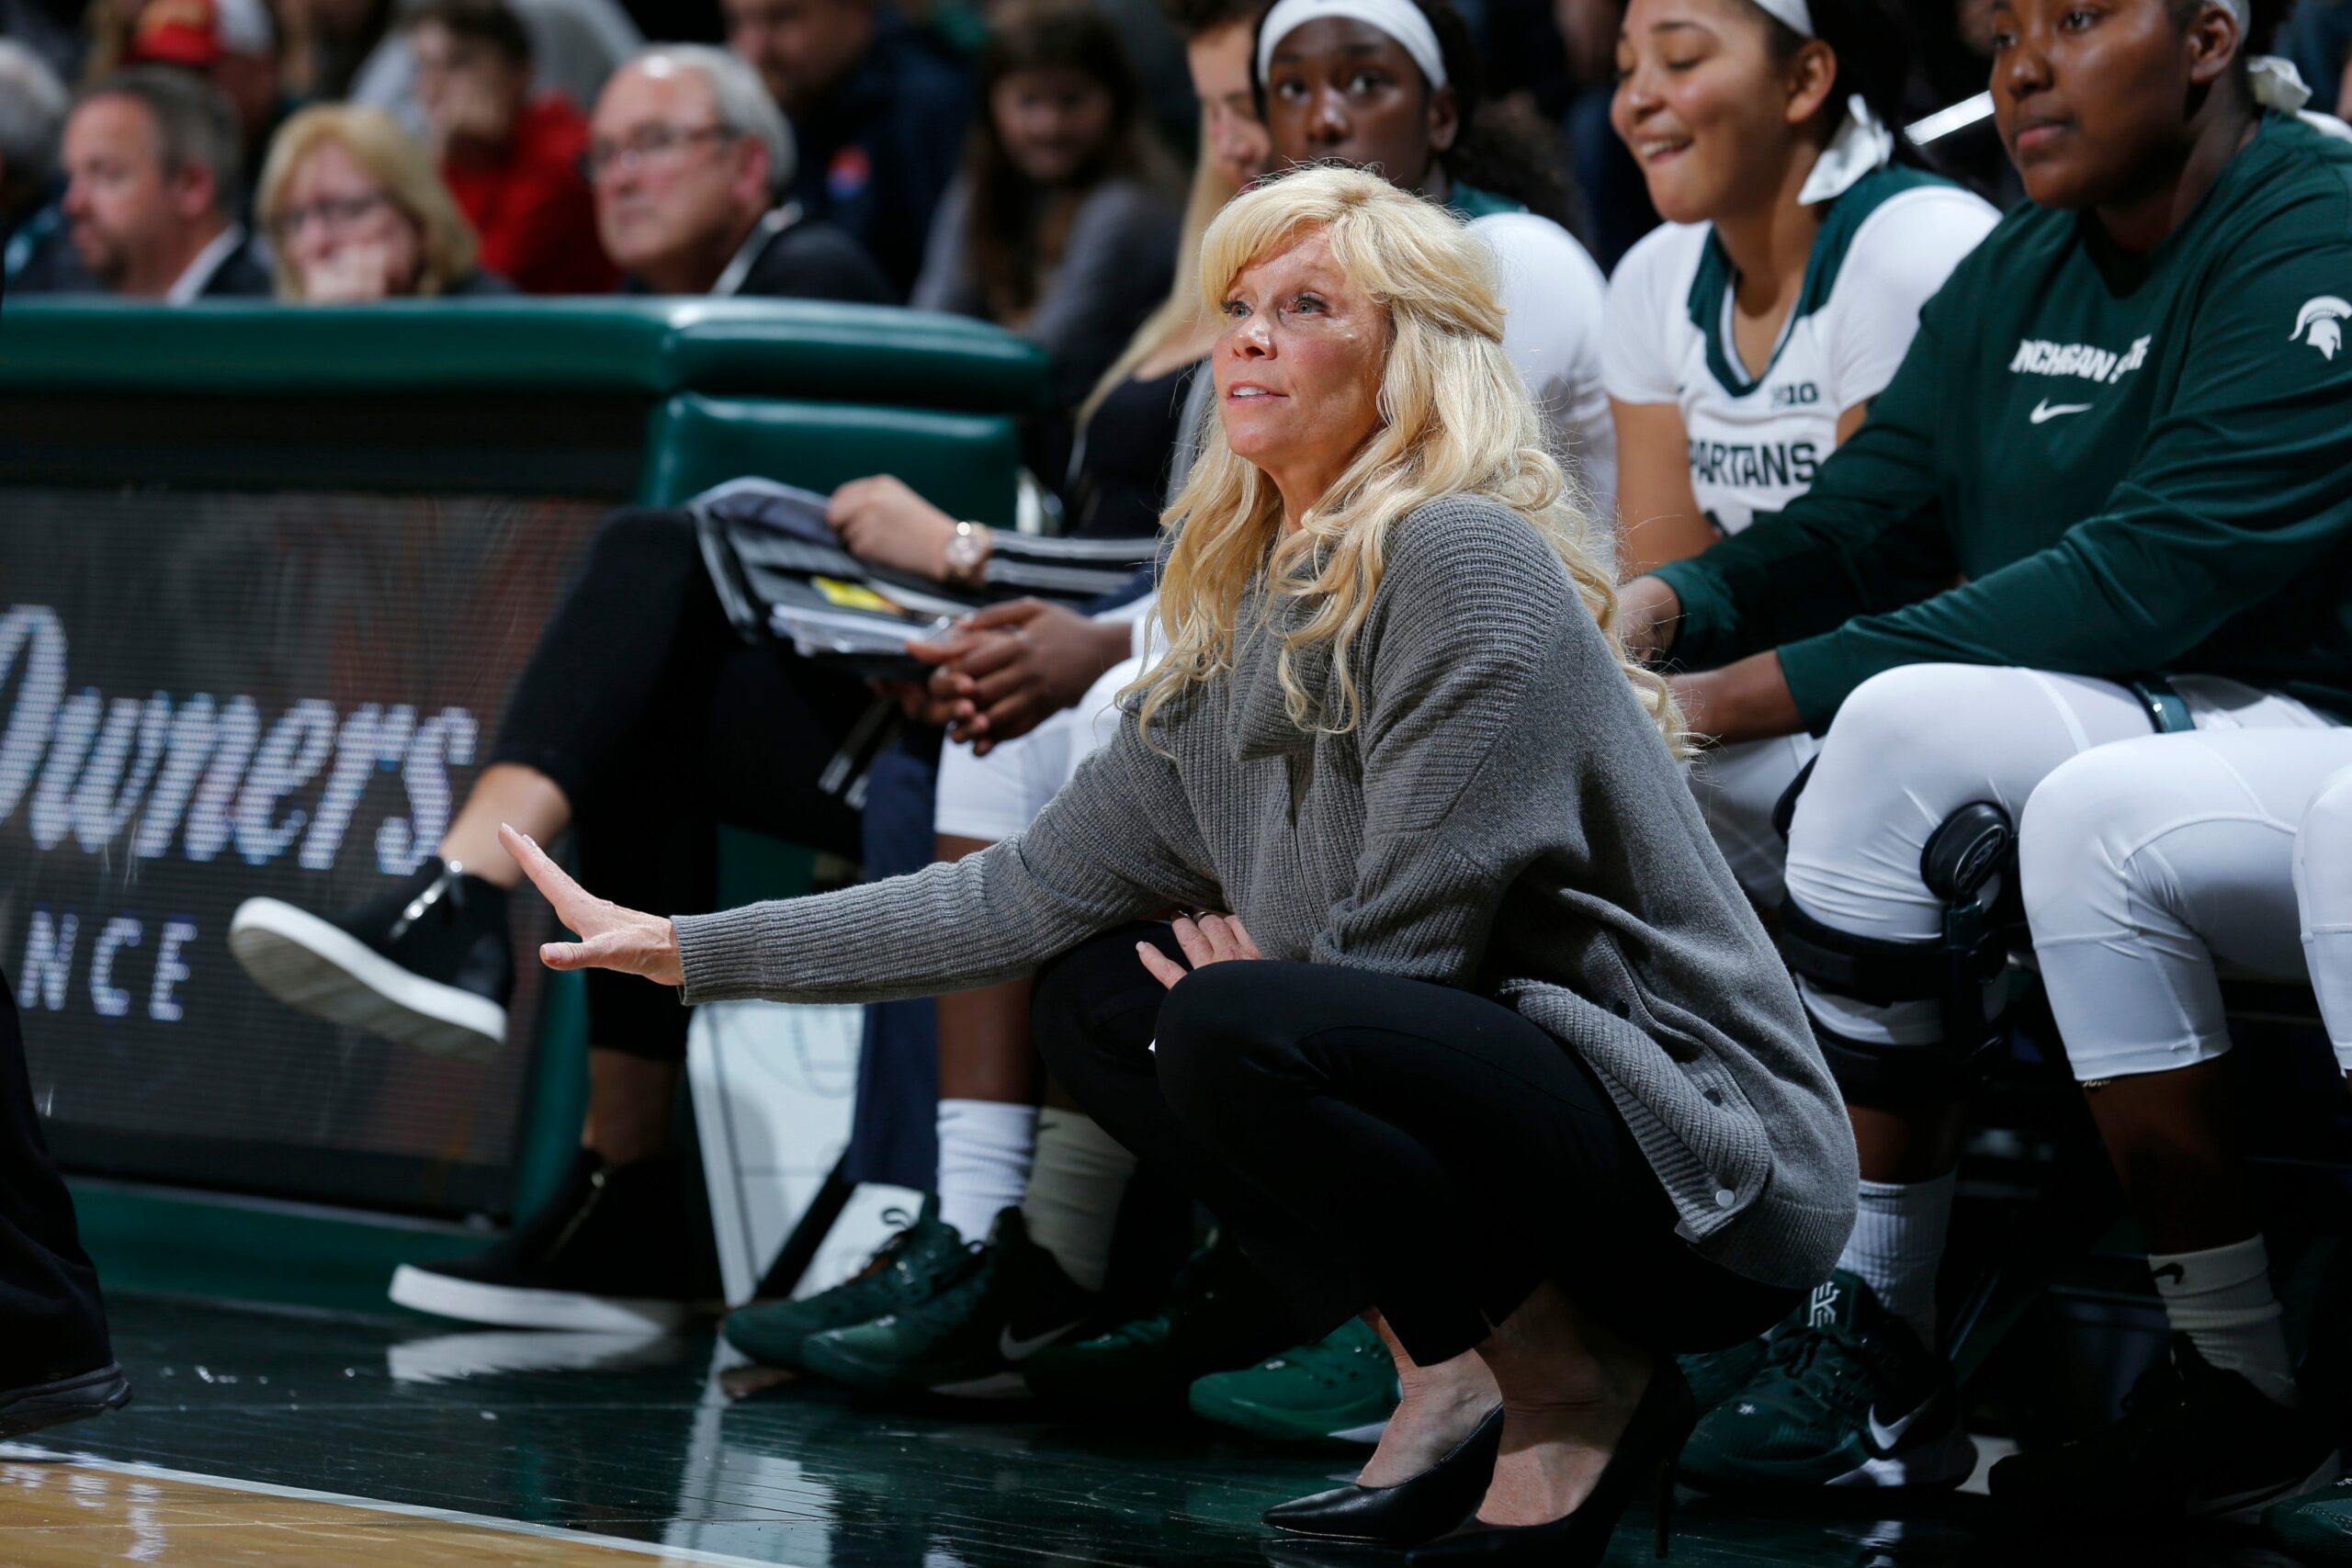 Breaking: Michigan State Women’s Basketball coach Suzy Merchant stepping down from role